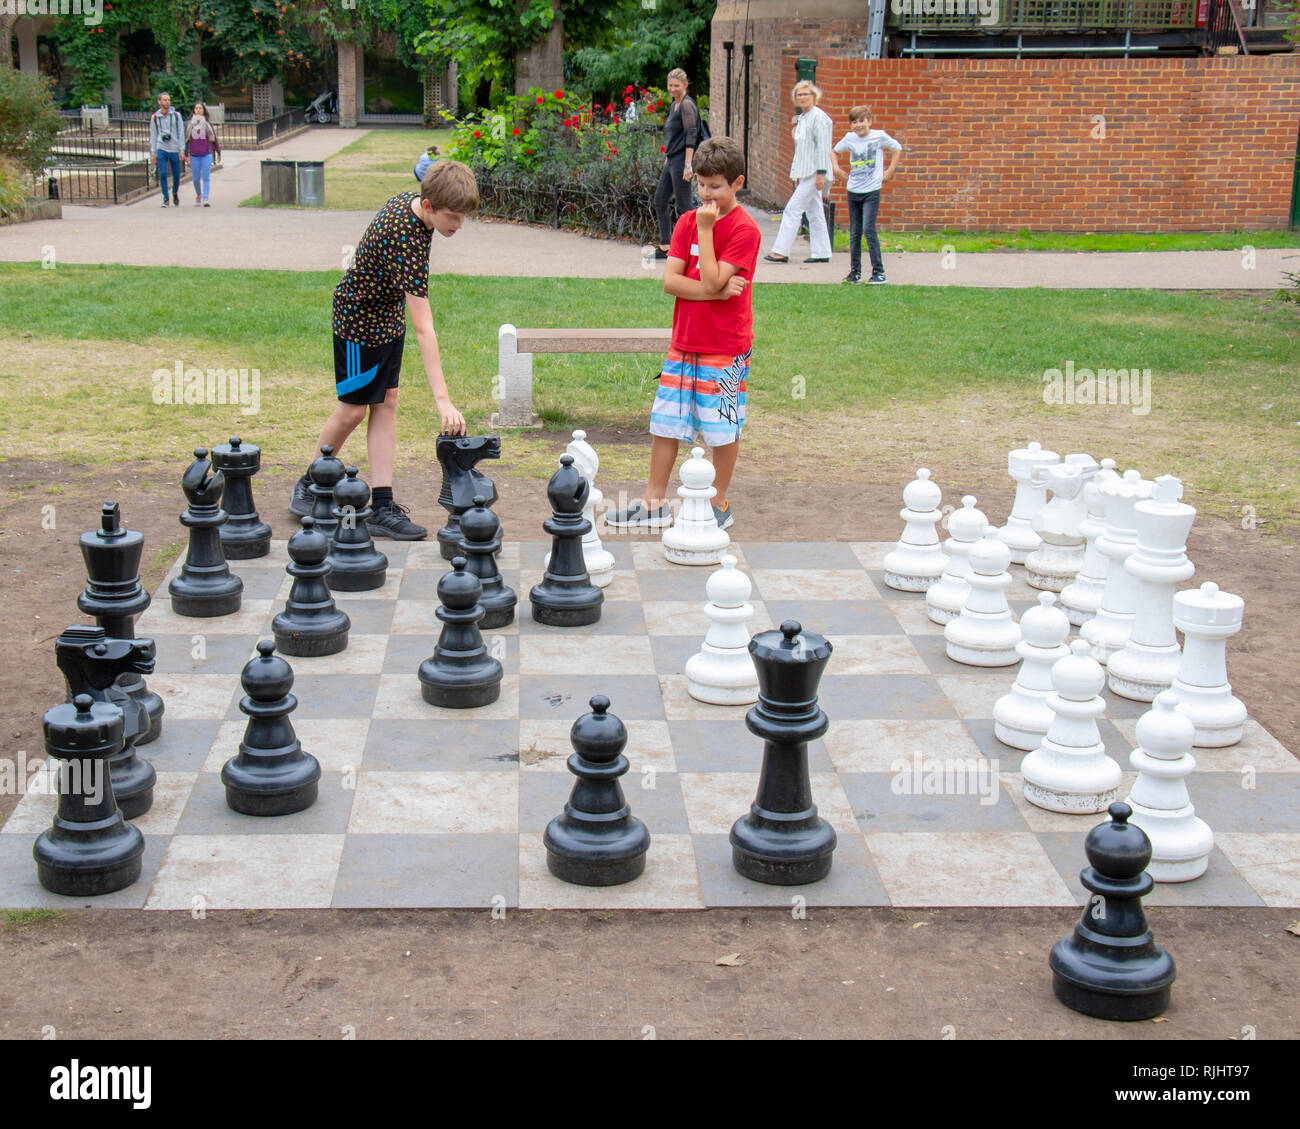 Two young boys playing outdoor chess in Holand Park in London, England Stock Photo